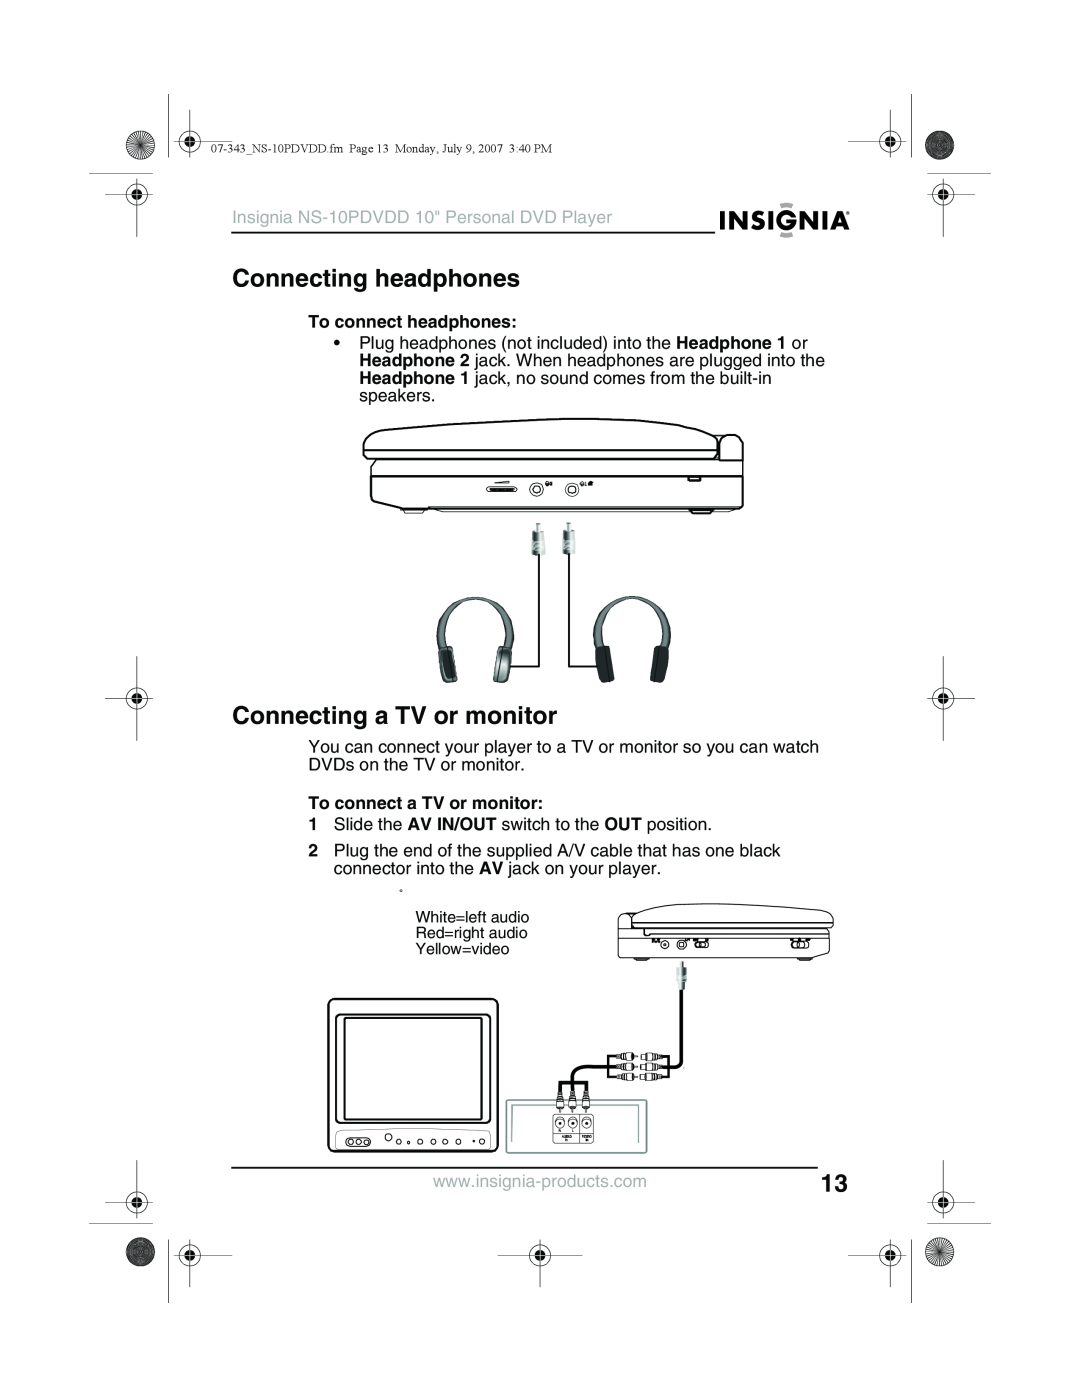 Insignia NS-10PDVDD Connecting headphones, Connecting a TV or monitor, To connect headphones, To connect a TV or monitor 